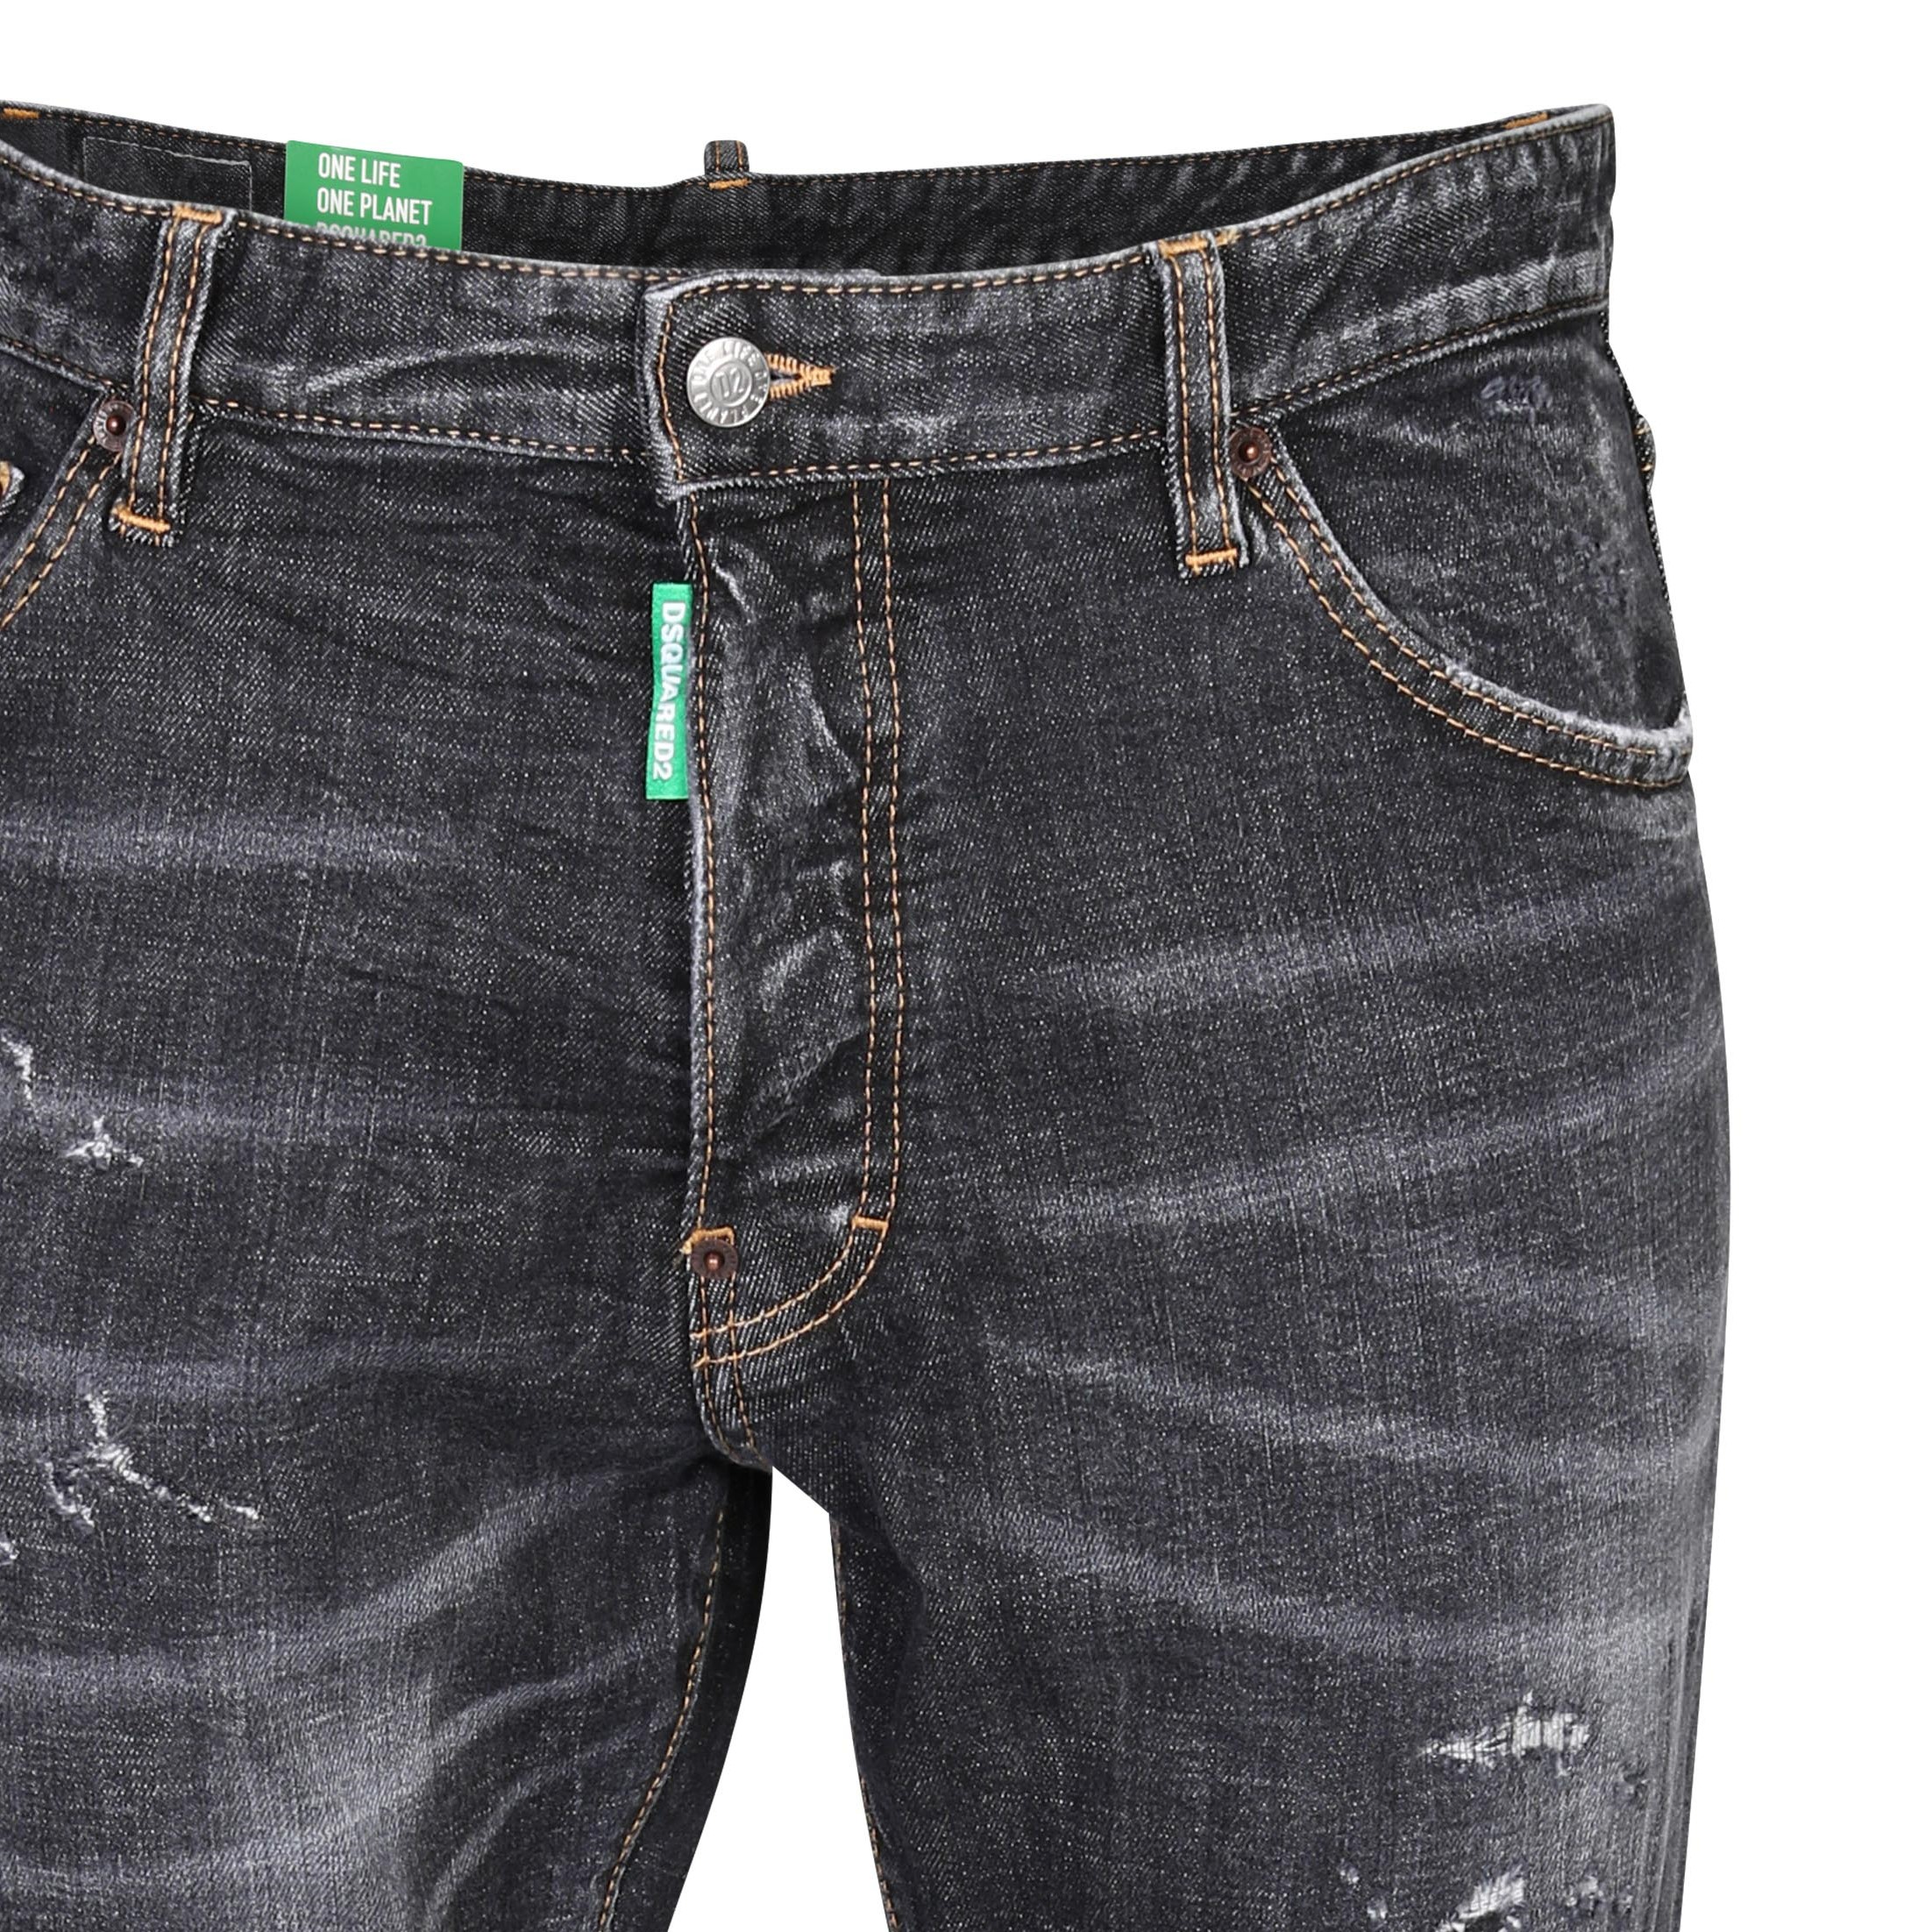 DSQUARED2 Green Label Cool Guy Jeans in Washed Black